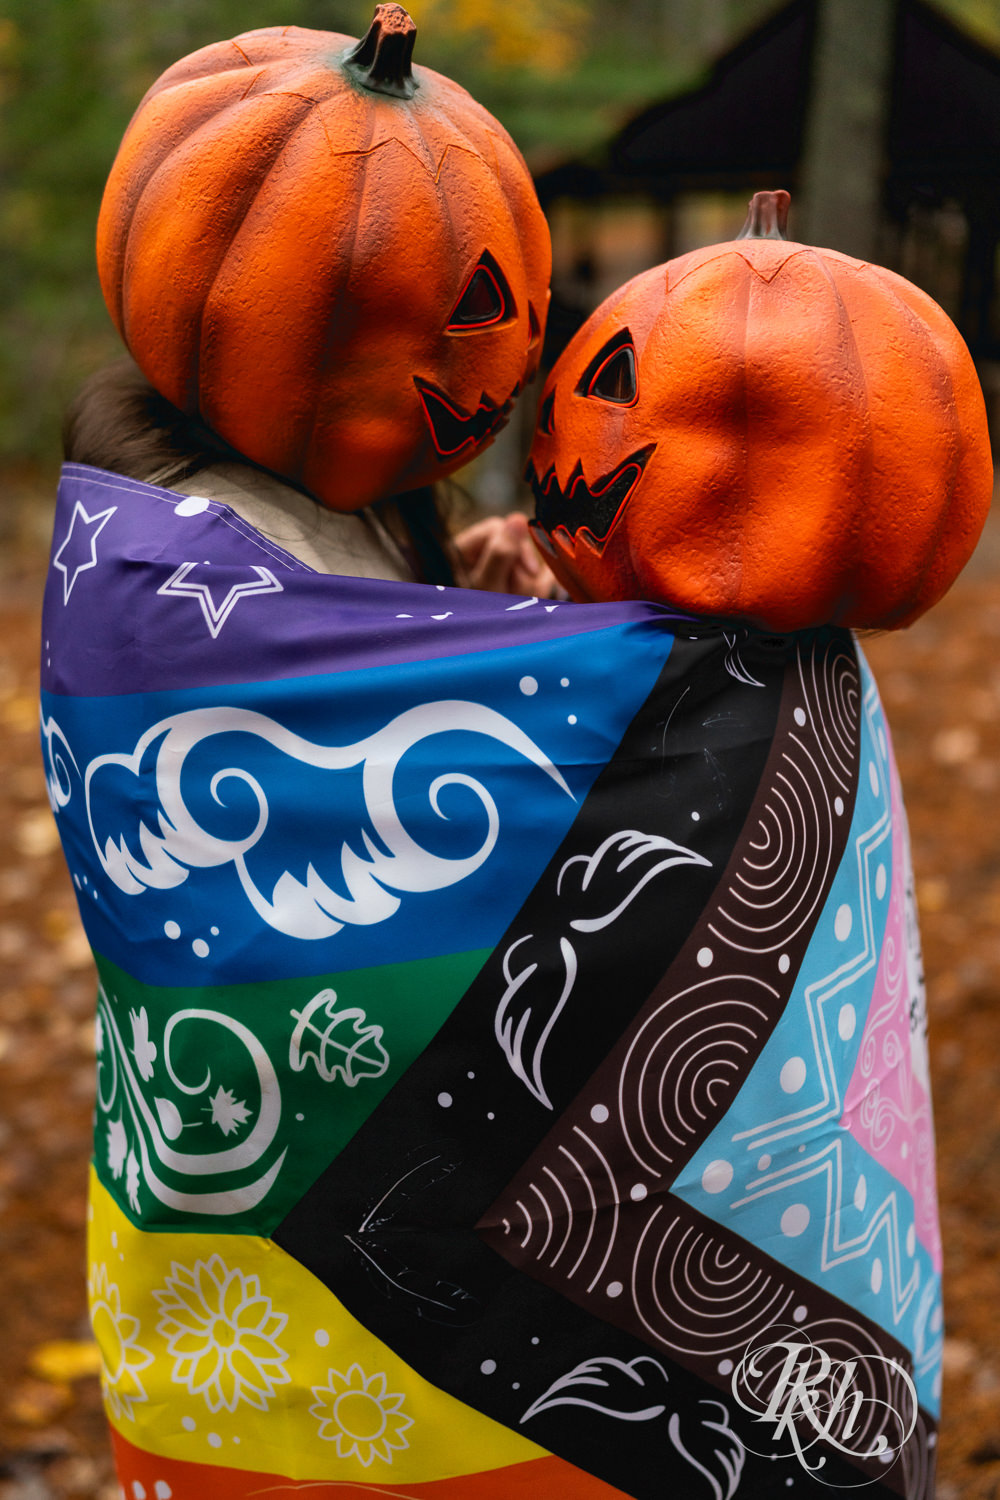 Lesbian couple kiss wrapped in Pride flag in pumpkin heads during Halloween engagement photos at Amnicon Falls in Wisconsin. 